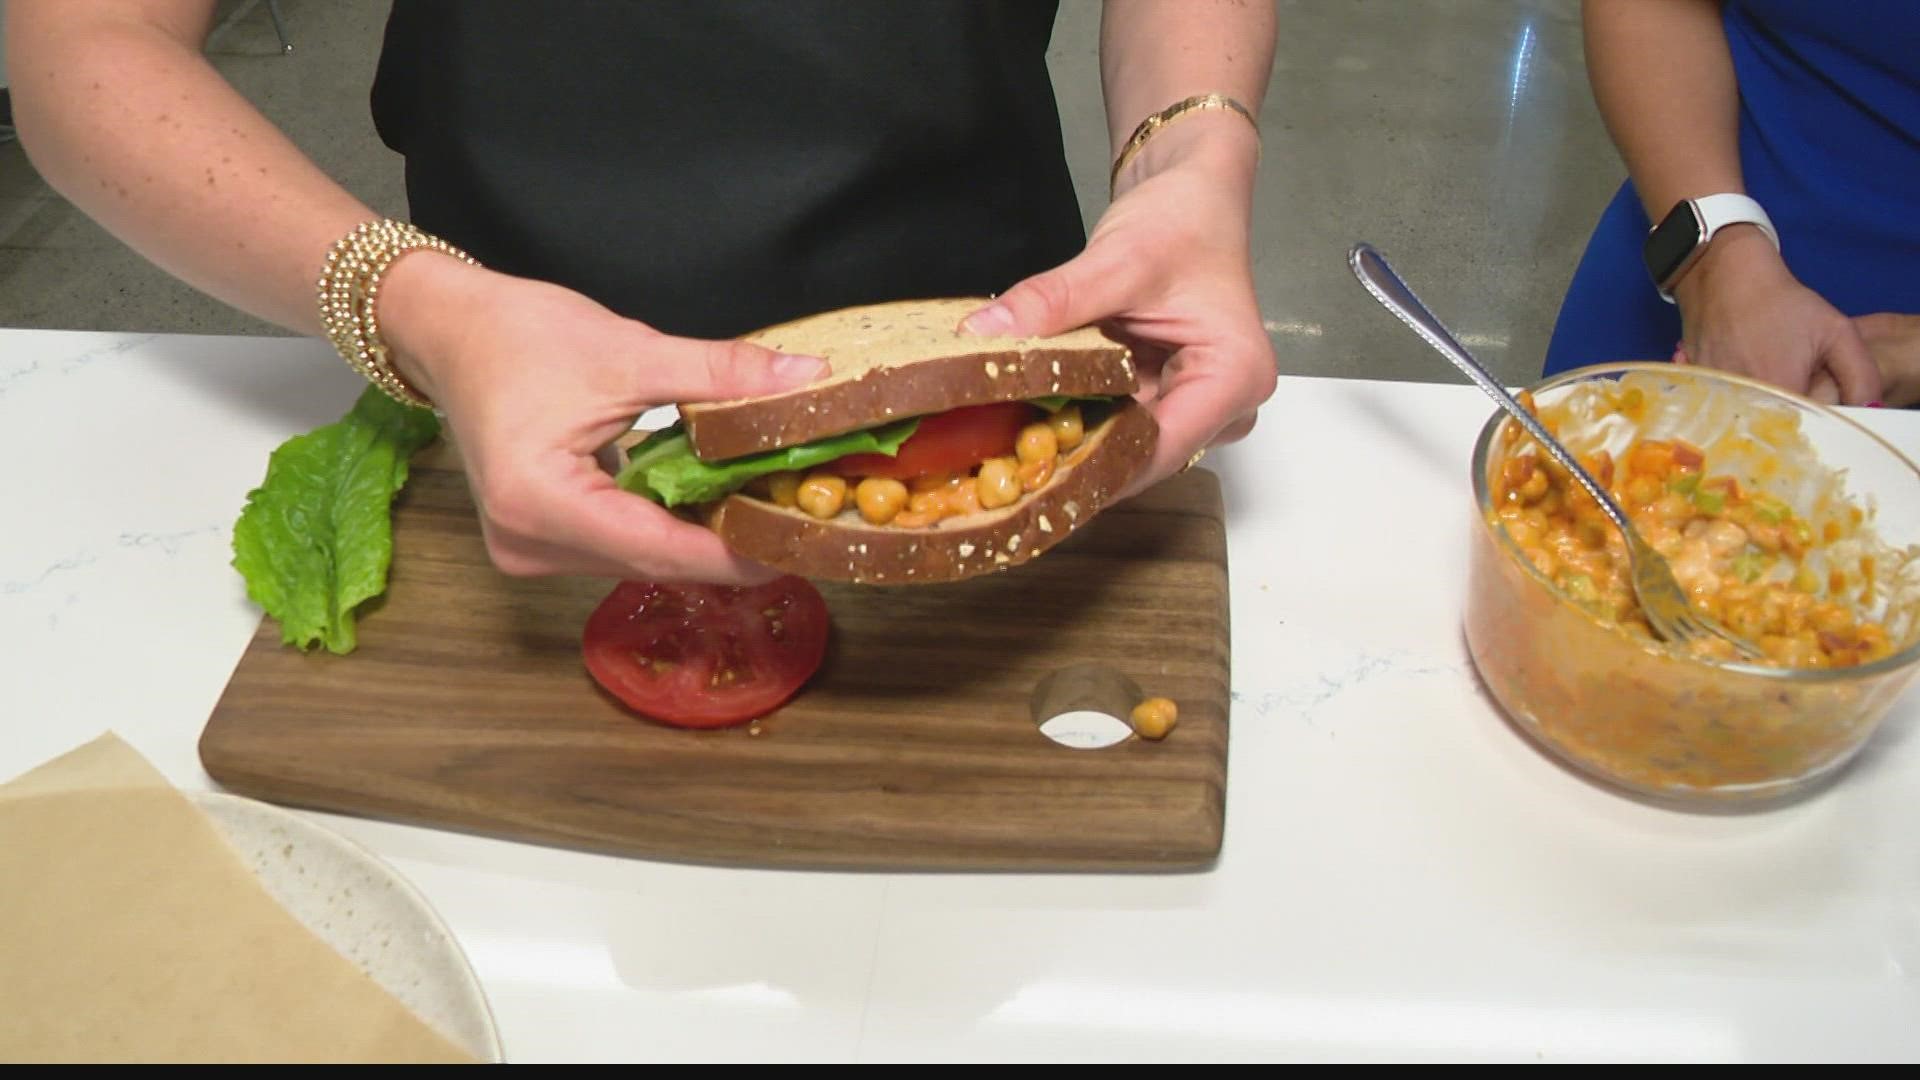 Emily Cline made buffalo chickpea sanwiches that are not only great for tailgating but also a quick meal to make in a pinch.